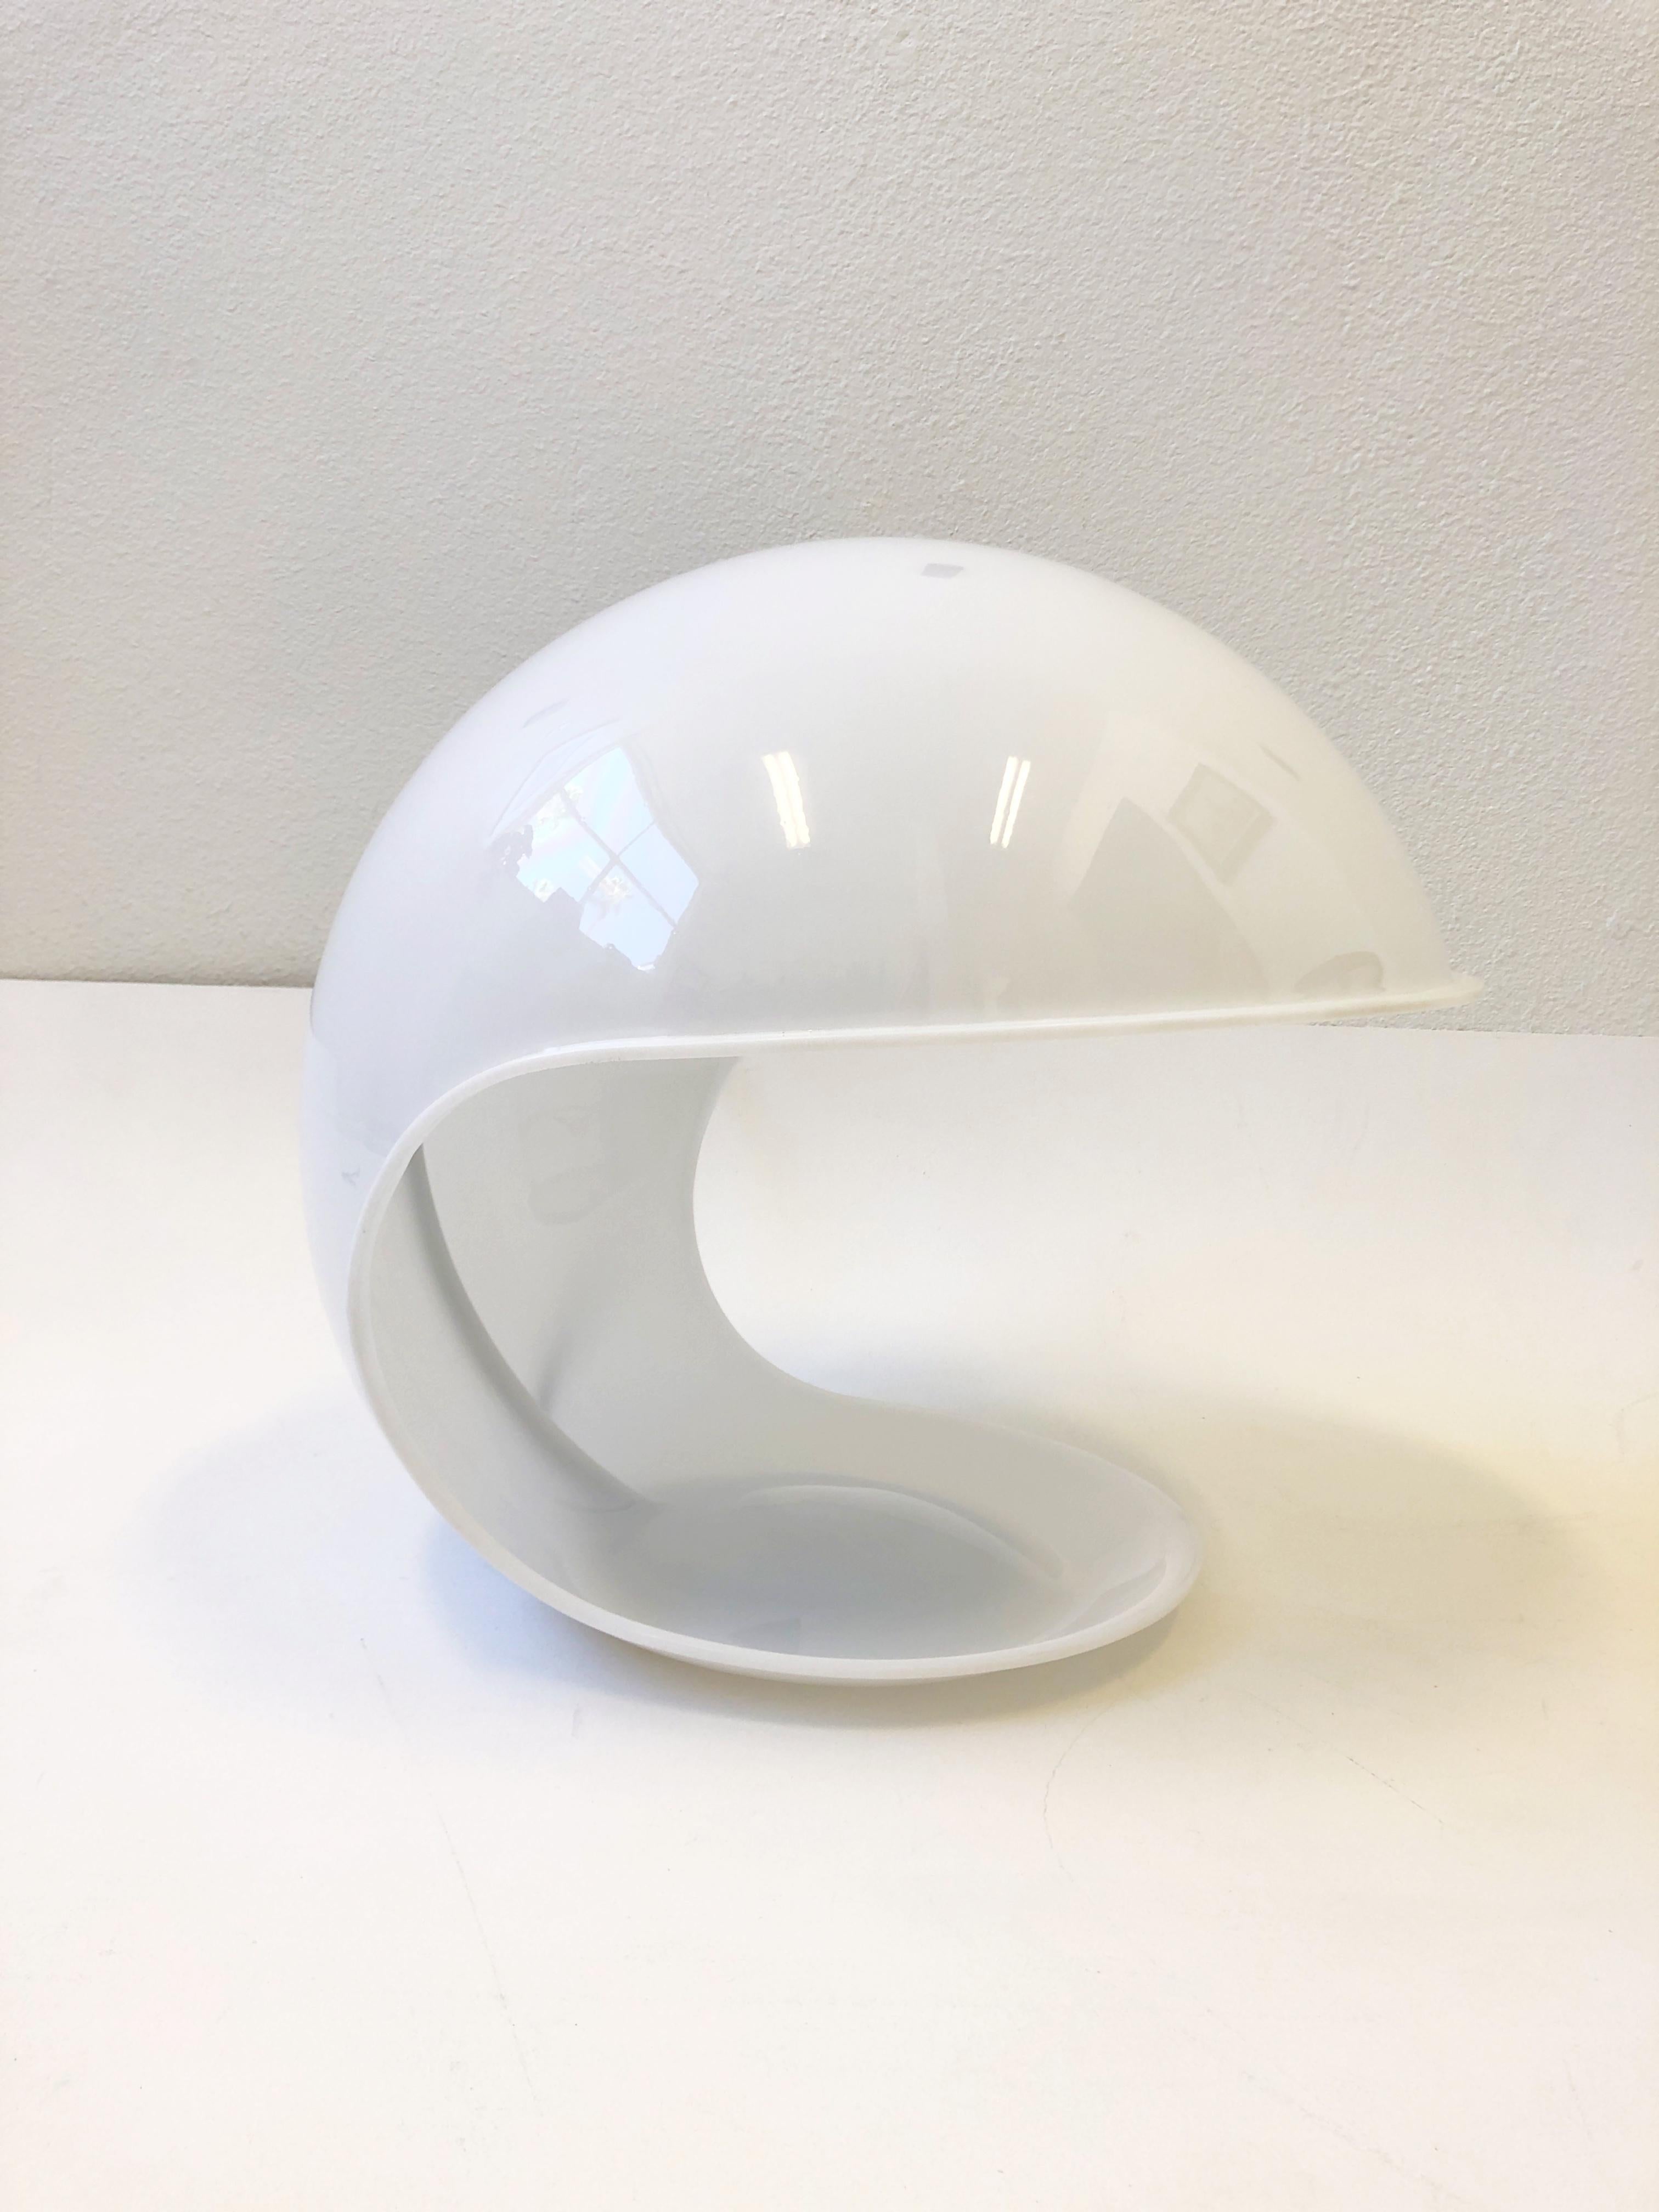 Polish white Acrylic “Flogia” table lamp design in the 1969 by Italian designer Elio Martinelli. 
It takes one regular 60m max Edison lightbulb.
 On/off in line switch. 
In beautiful condition. 
Measurements: 18” Deep, 18.25” Wide and 16” High.